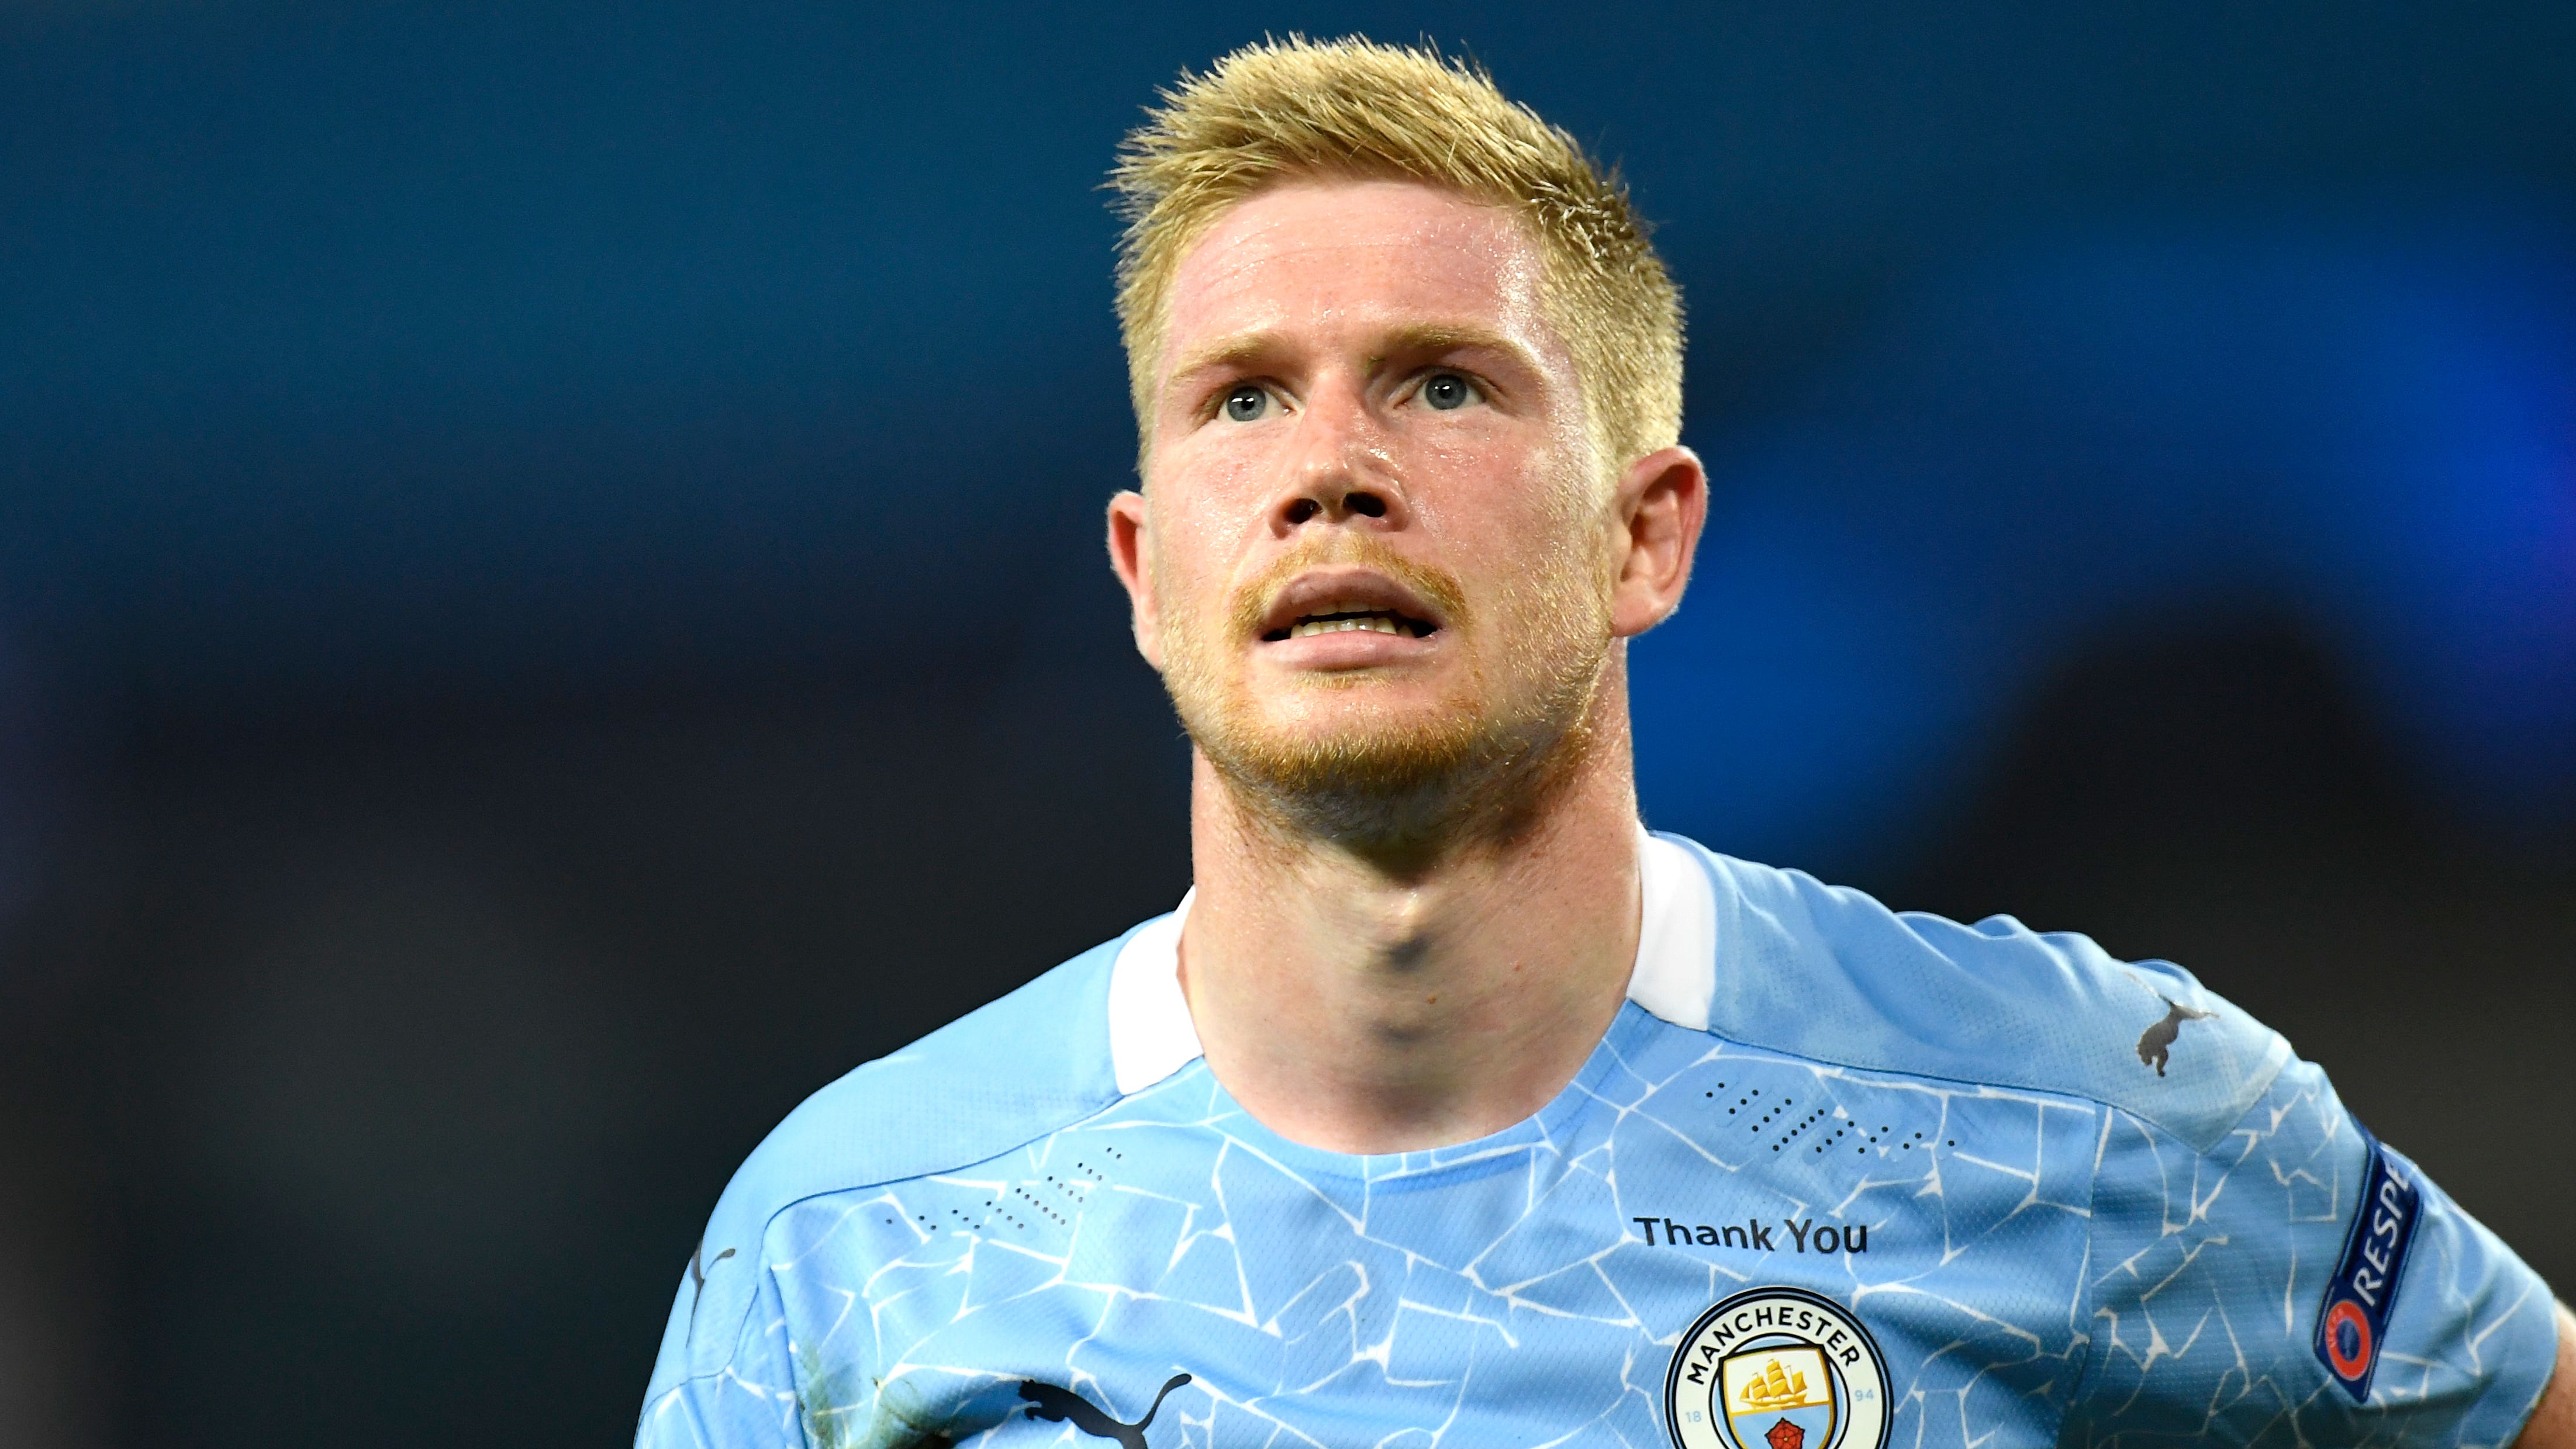  Kevin De Bruyne, a Belgian midfielder playing for Manchester City, looks on after scoring a goal against Real Madrid in the first leg of the Champions League round of 16 tie at the Santiago Bernabeu Stadium in Madrid, Spain.